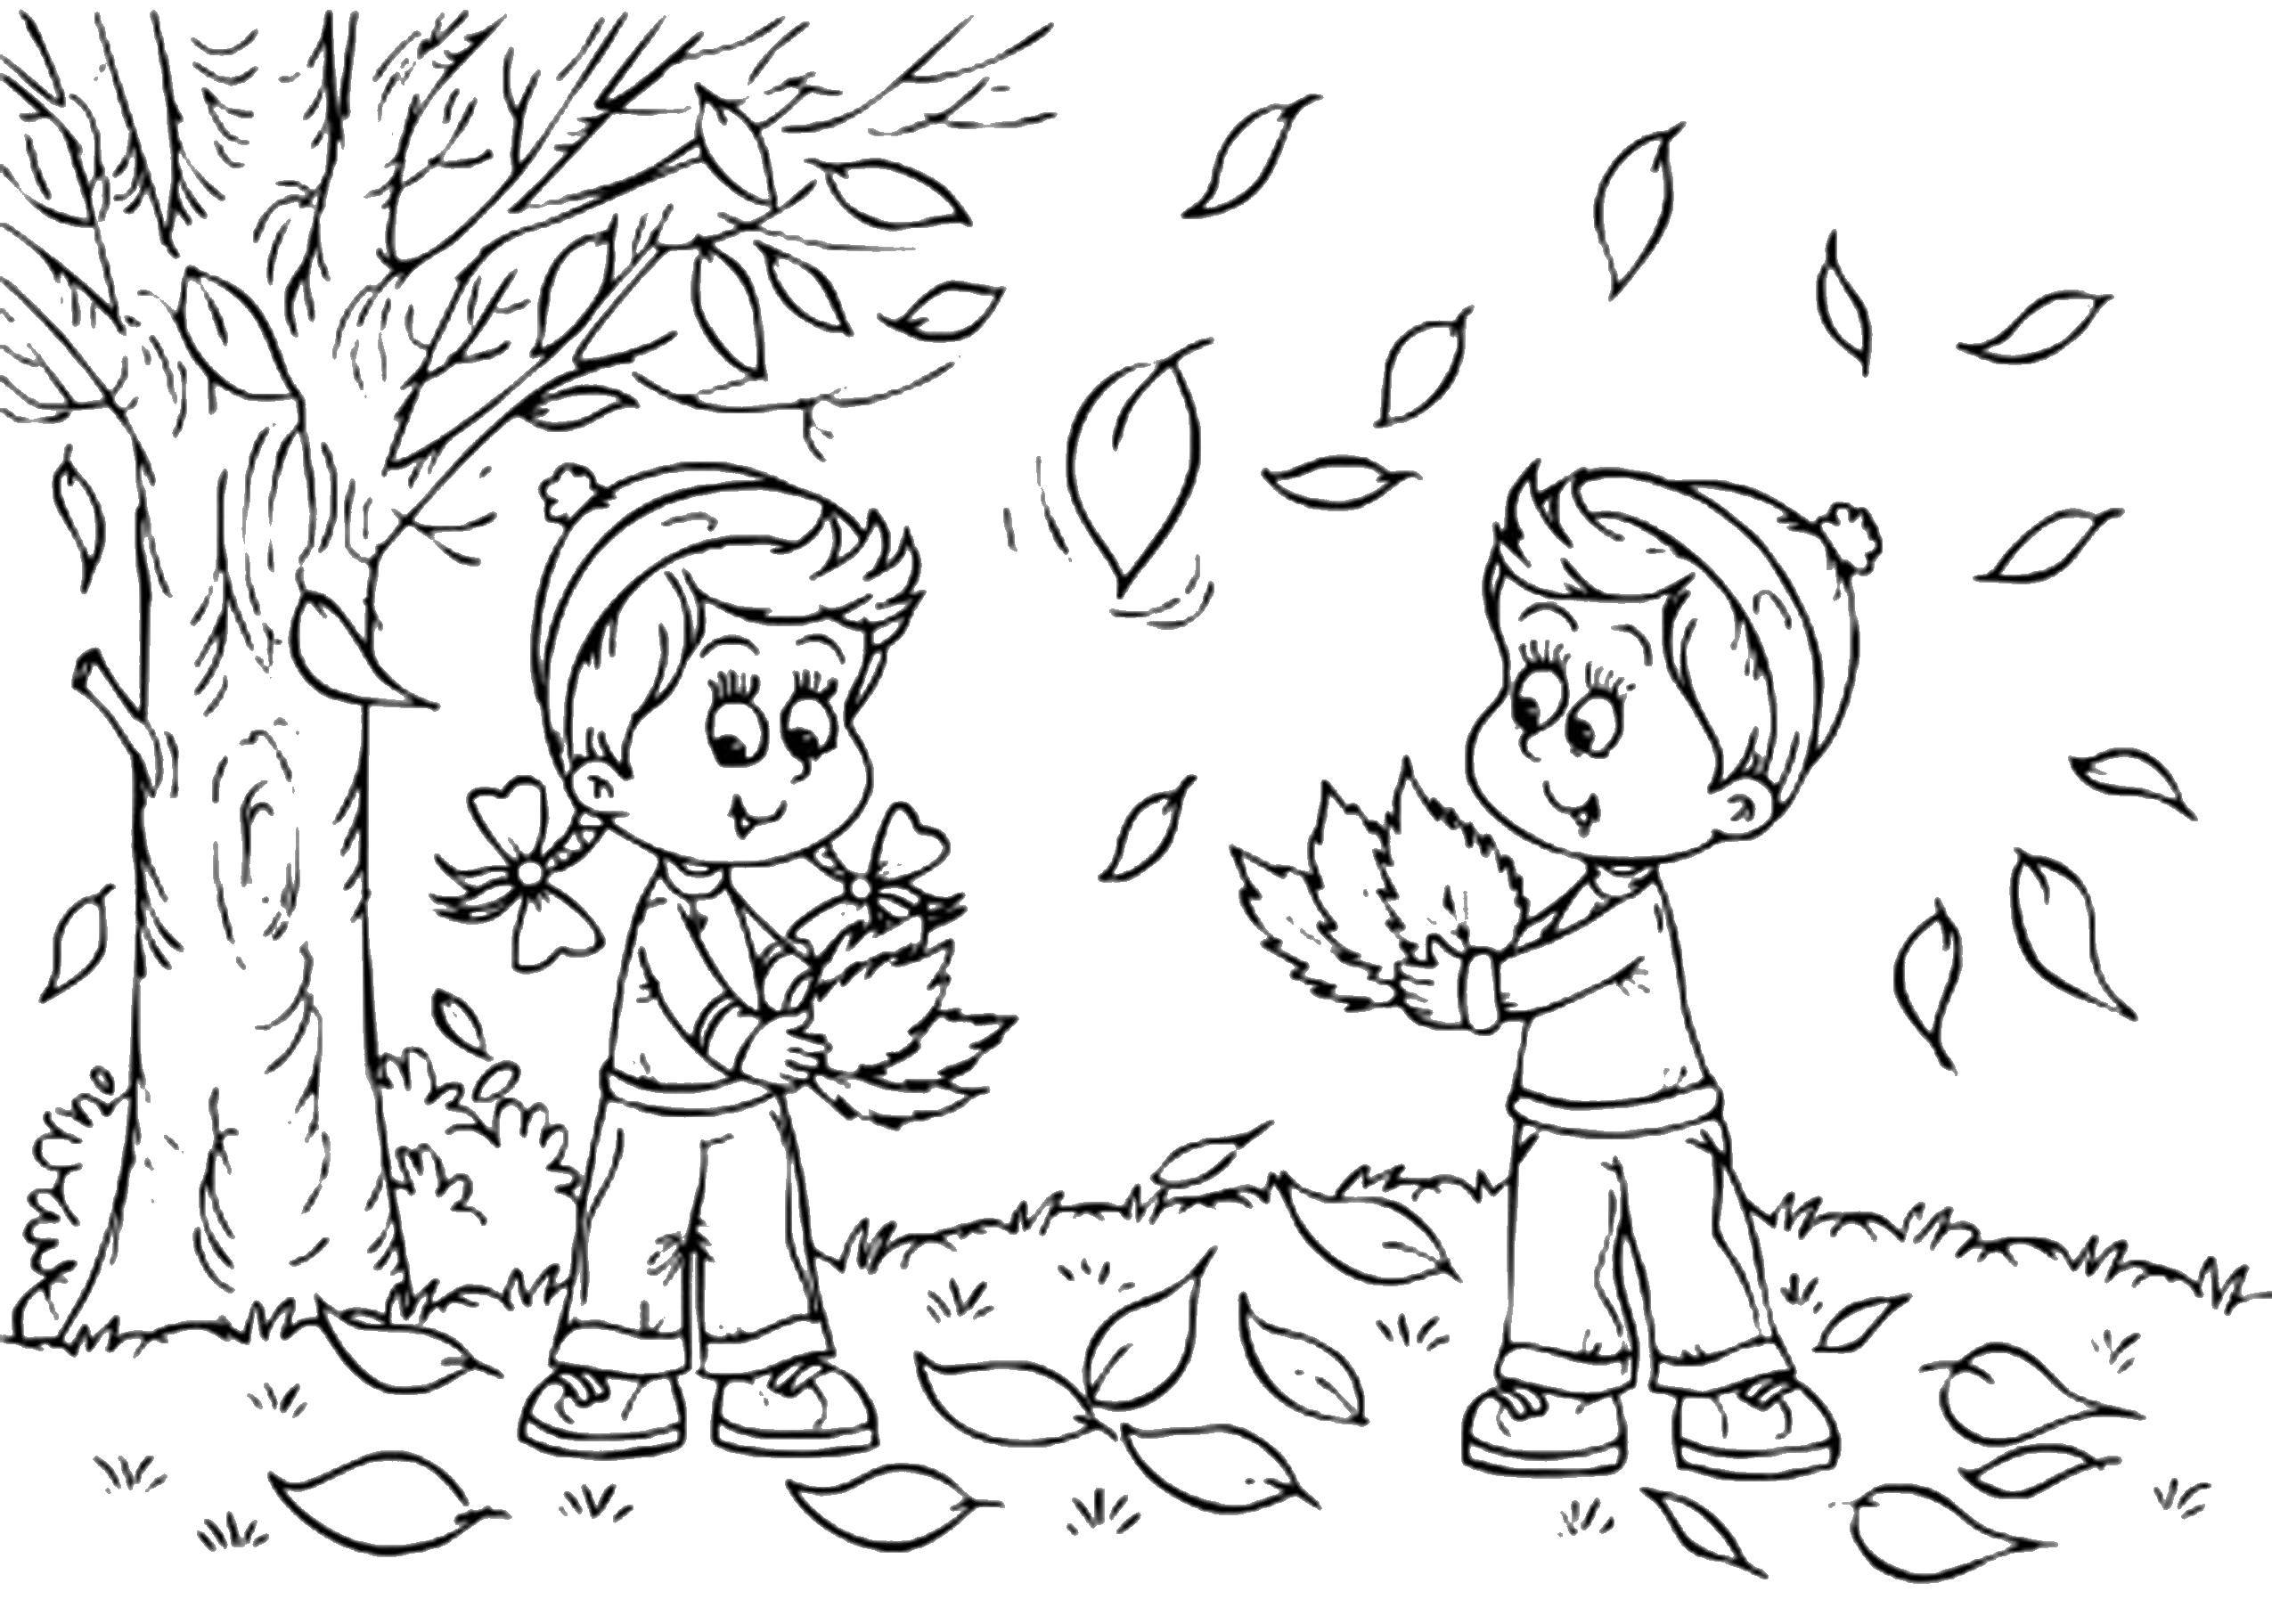 Coloring Children playing in autumn leaves. Category Autumn. Tags:  Autumn, leaves, children.